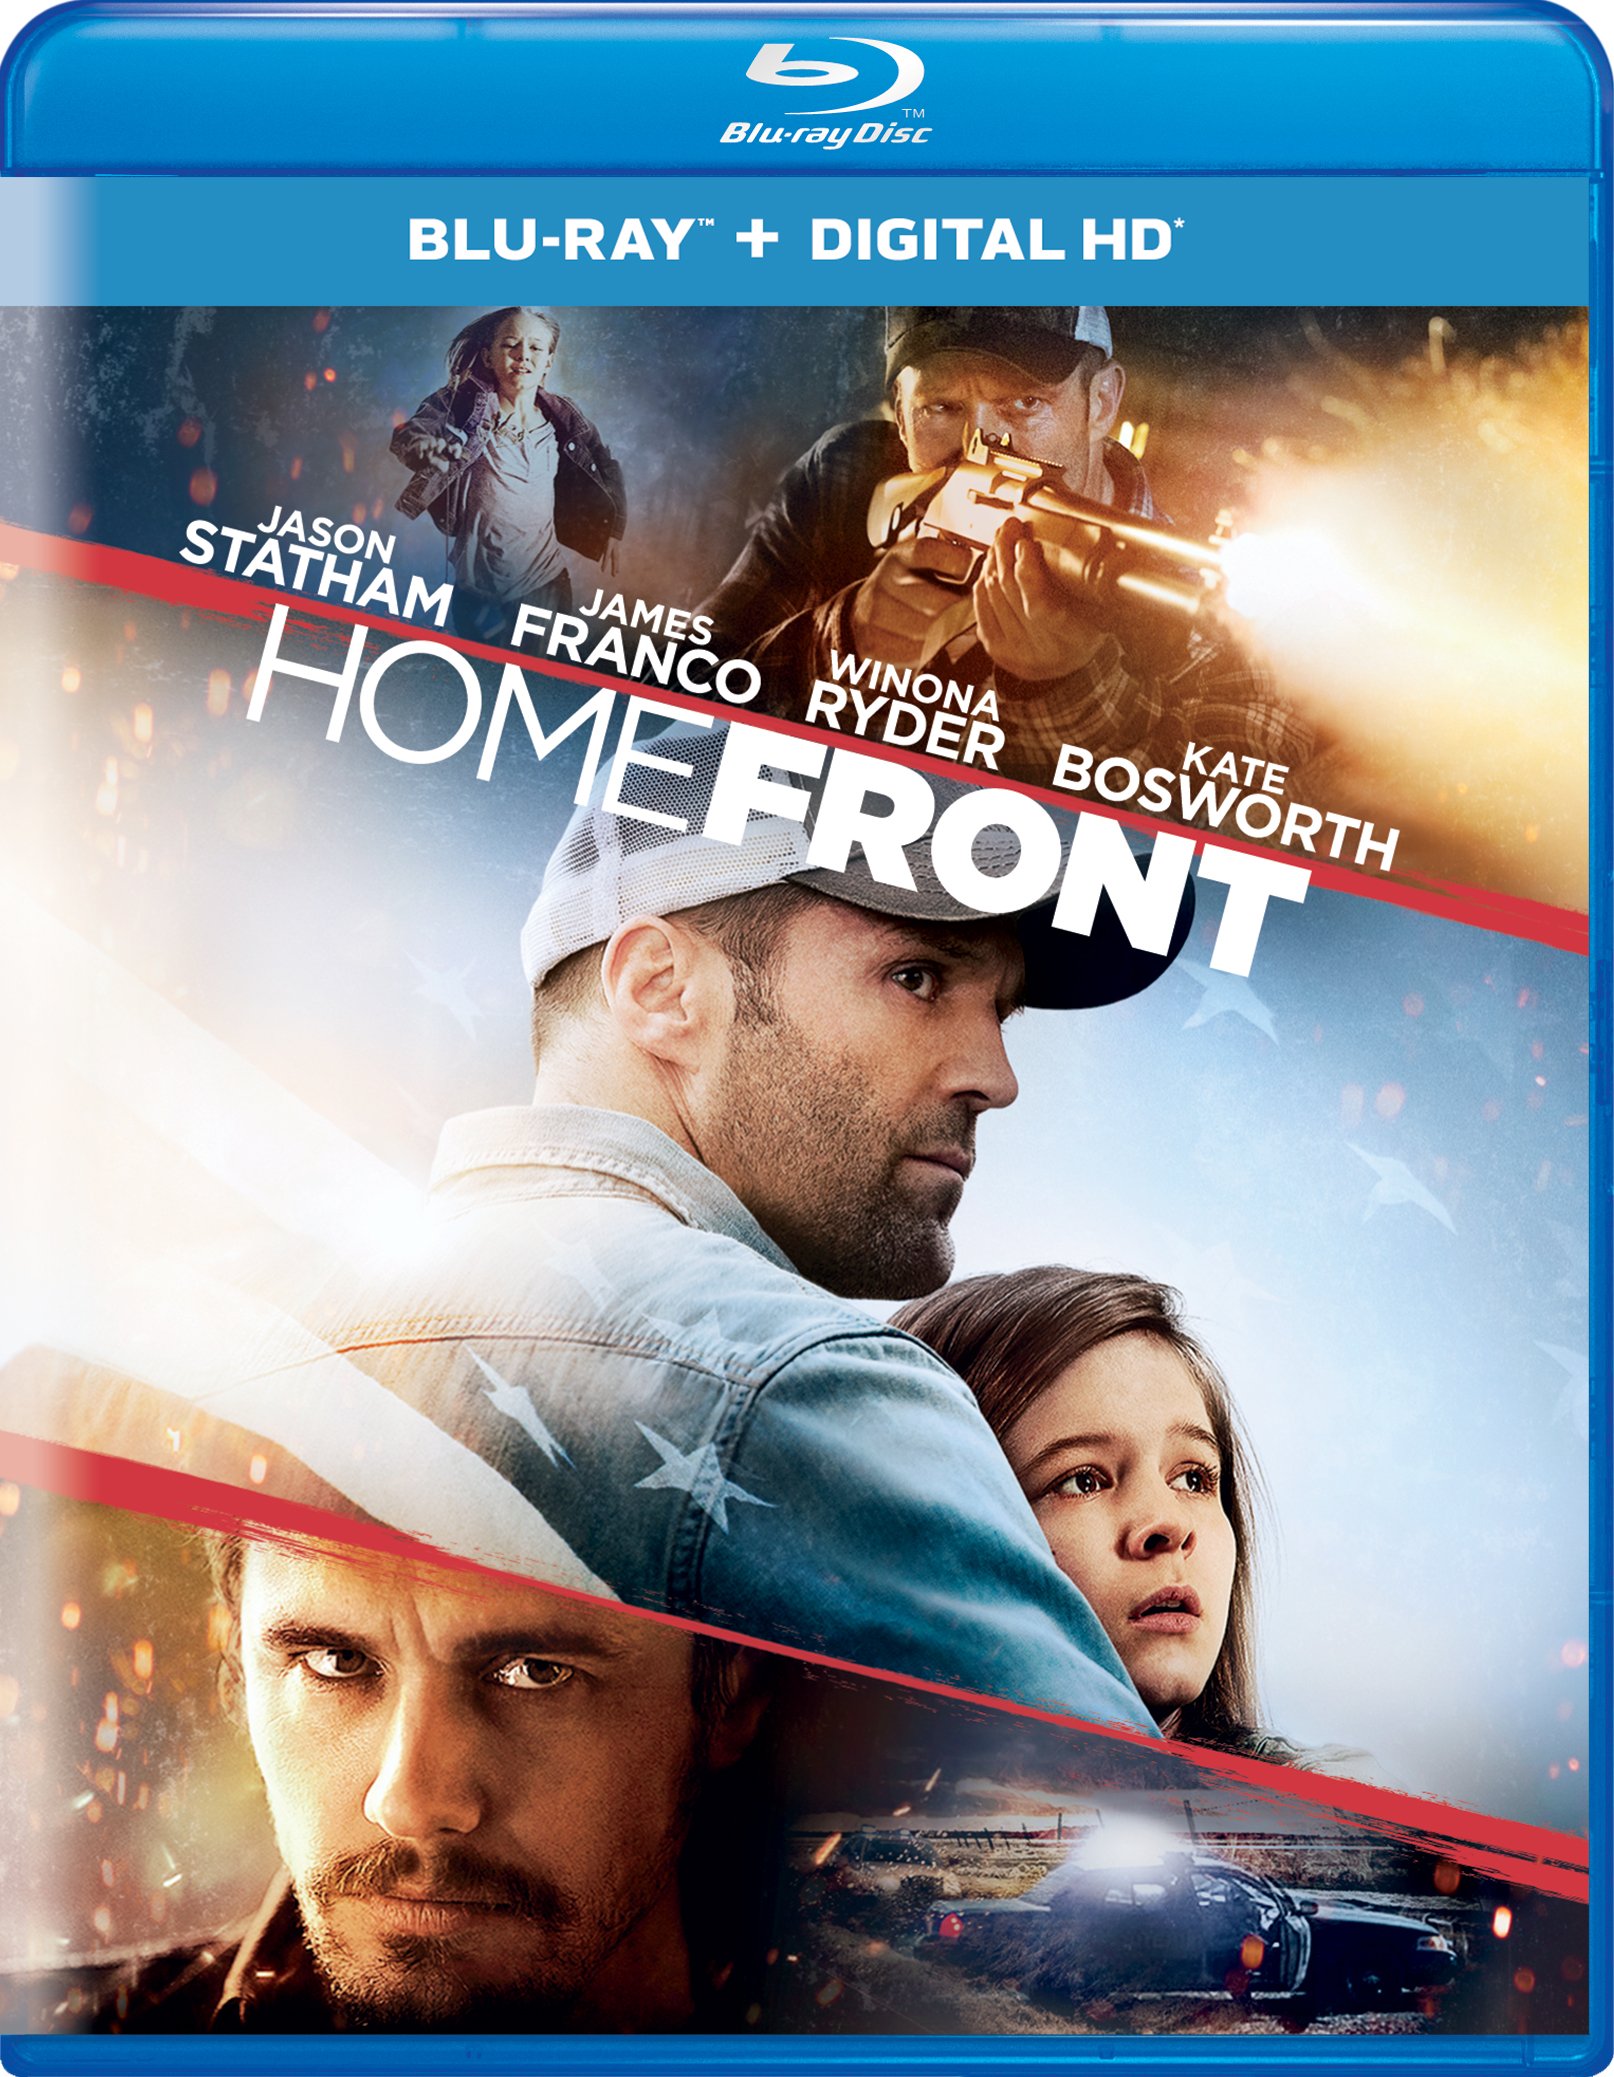 Homefront DVD Release Date March 11, 2014